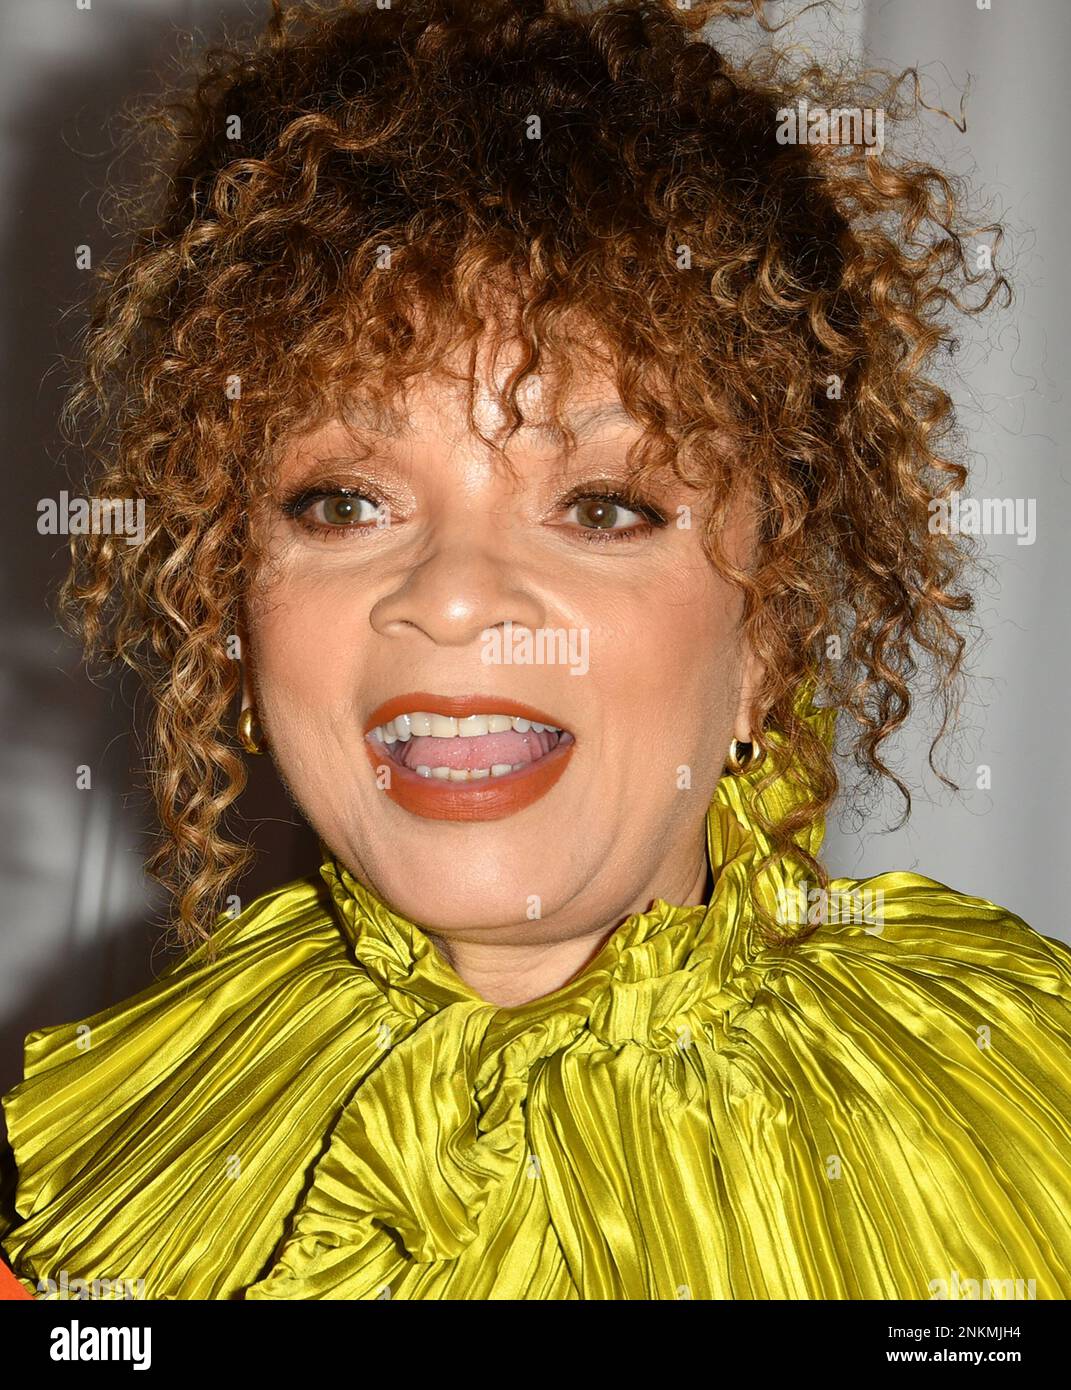 Los Angeles, Ca. 23rd Feb, 2023. Ruth E. Carter attends the 54th NAACP Image Awards Reception & Fashion Show at the Event Deck at LA Live on February 23, 2023 in Los Angeles, California. Credit: Koi Sojer/Snap'n U Photos/Media Punch/Alamy Live News Stock Photo